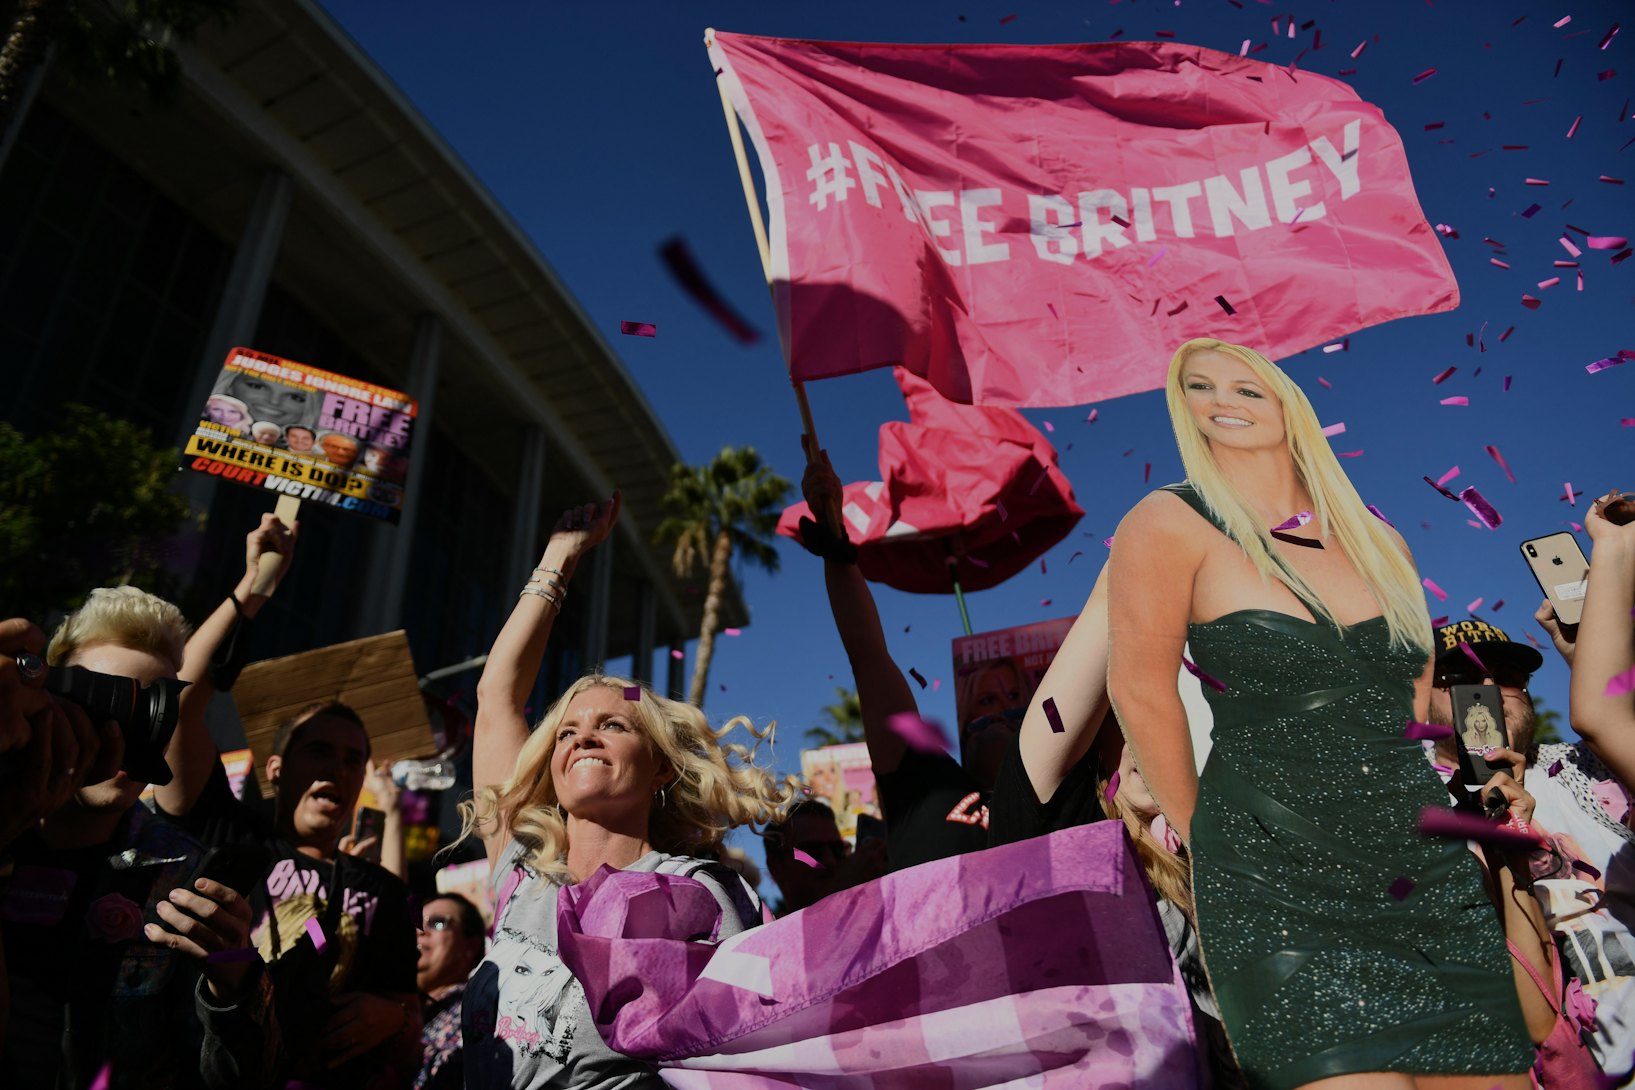 TOPSHOT - Supporters of the FreeBritney movement rally in support of musician Britney Spears for a c...